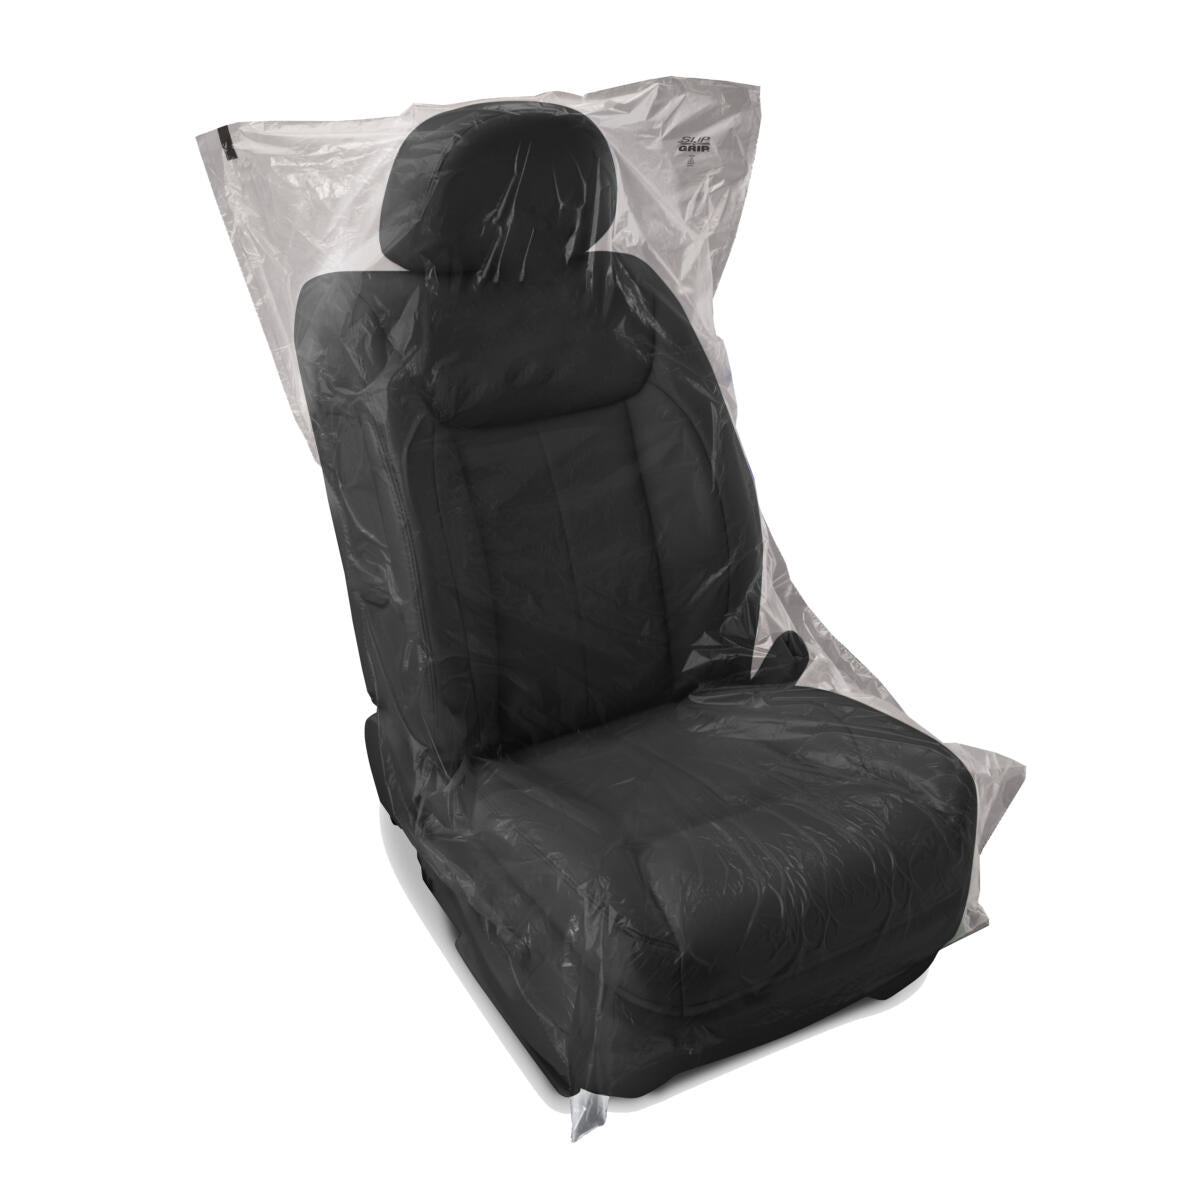 Automotive Plastic Seat Covers - 0.5 Thickness - 500 Roll - Slip-N-Grip